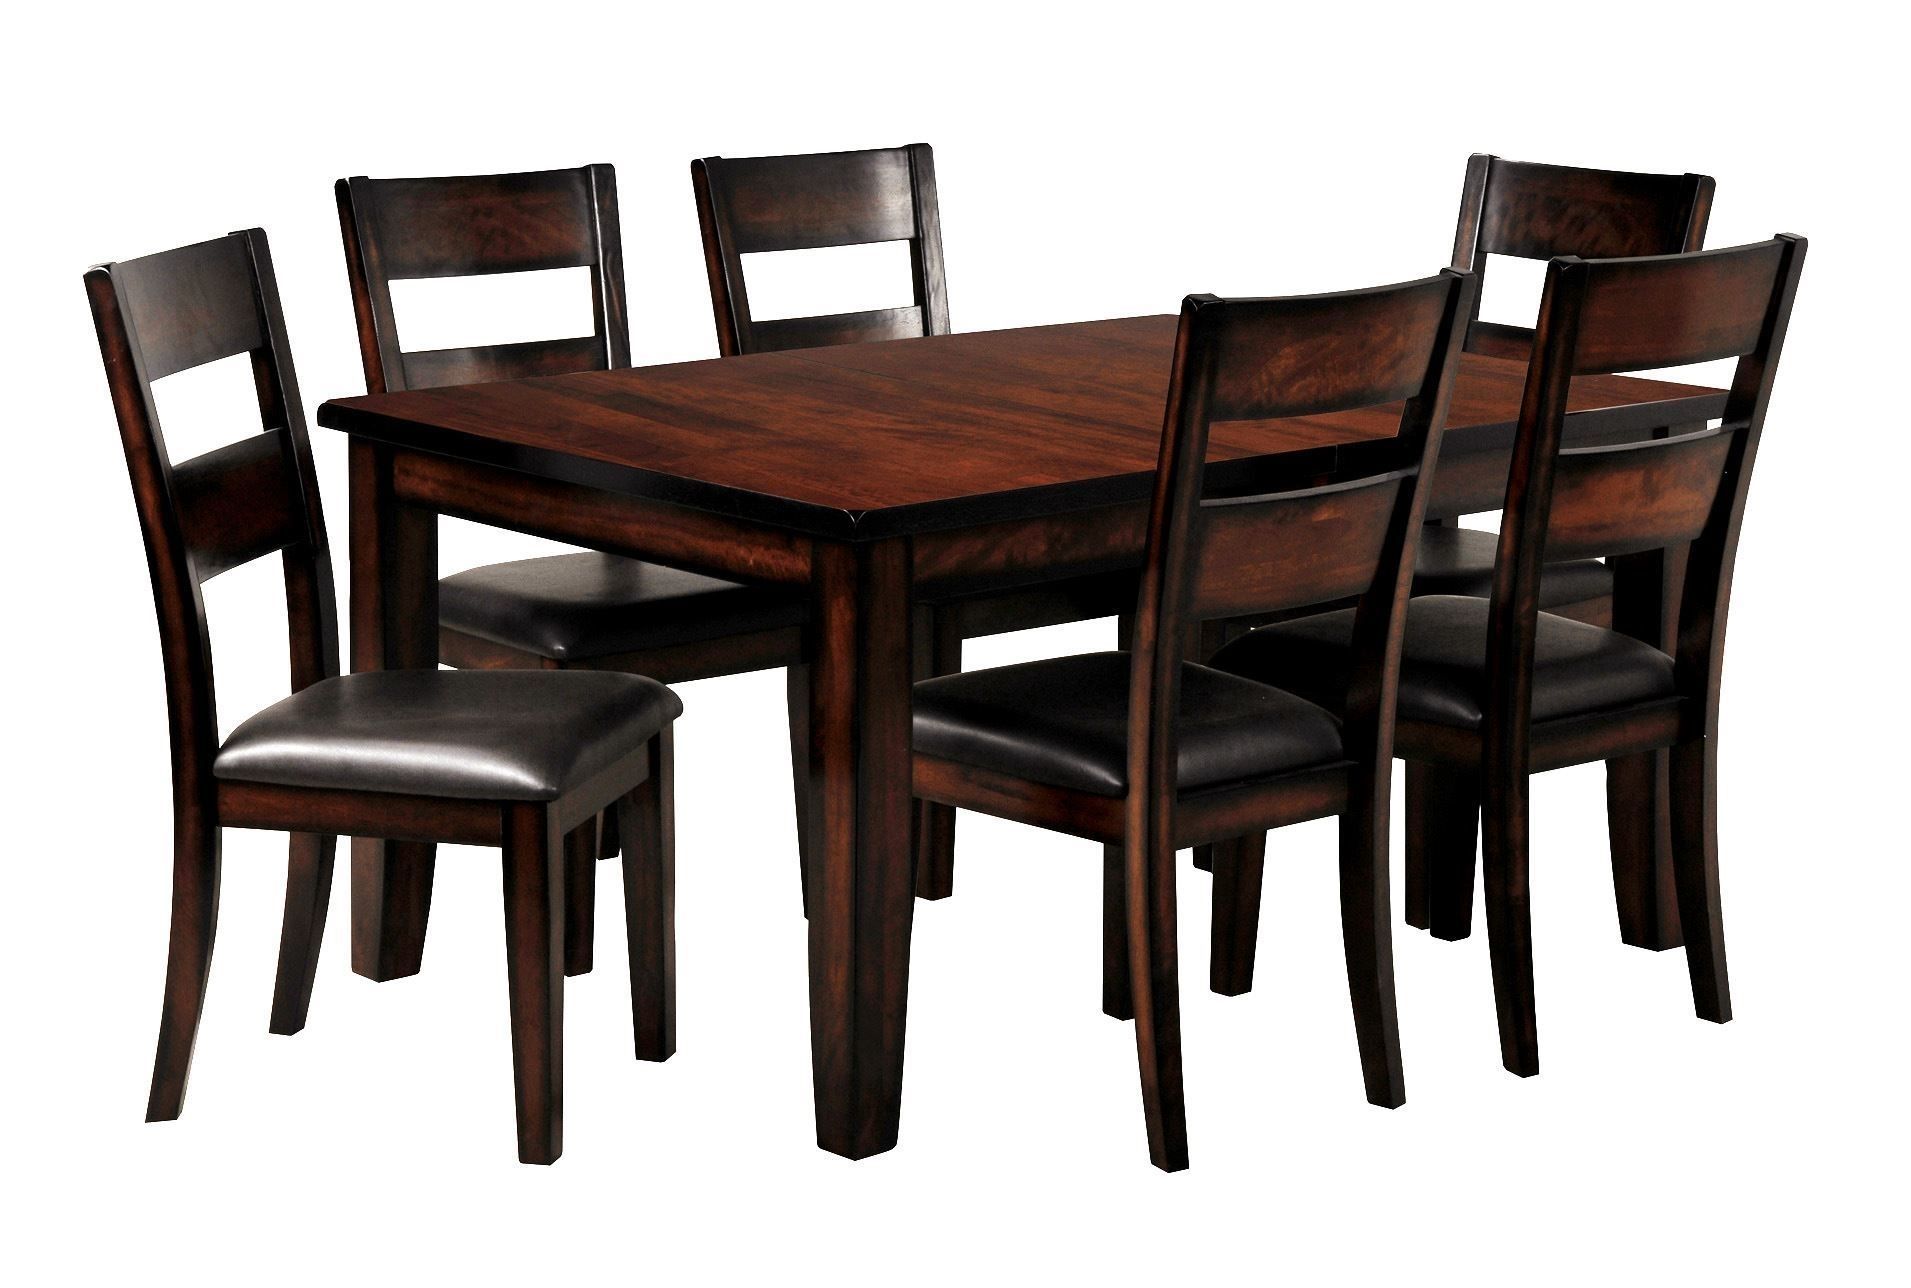 Rocco 7 Piece Extension Dining Set | Jodys Wish List (Gift Ideas With Regard To Latest Rocco Extension Dining Tables (View 5 of 20)